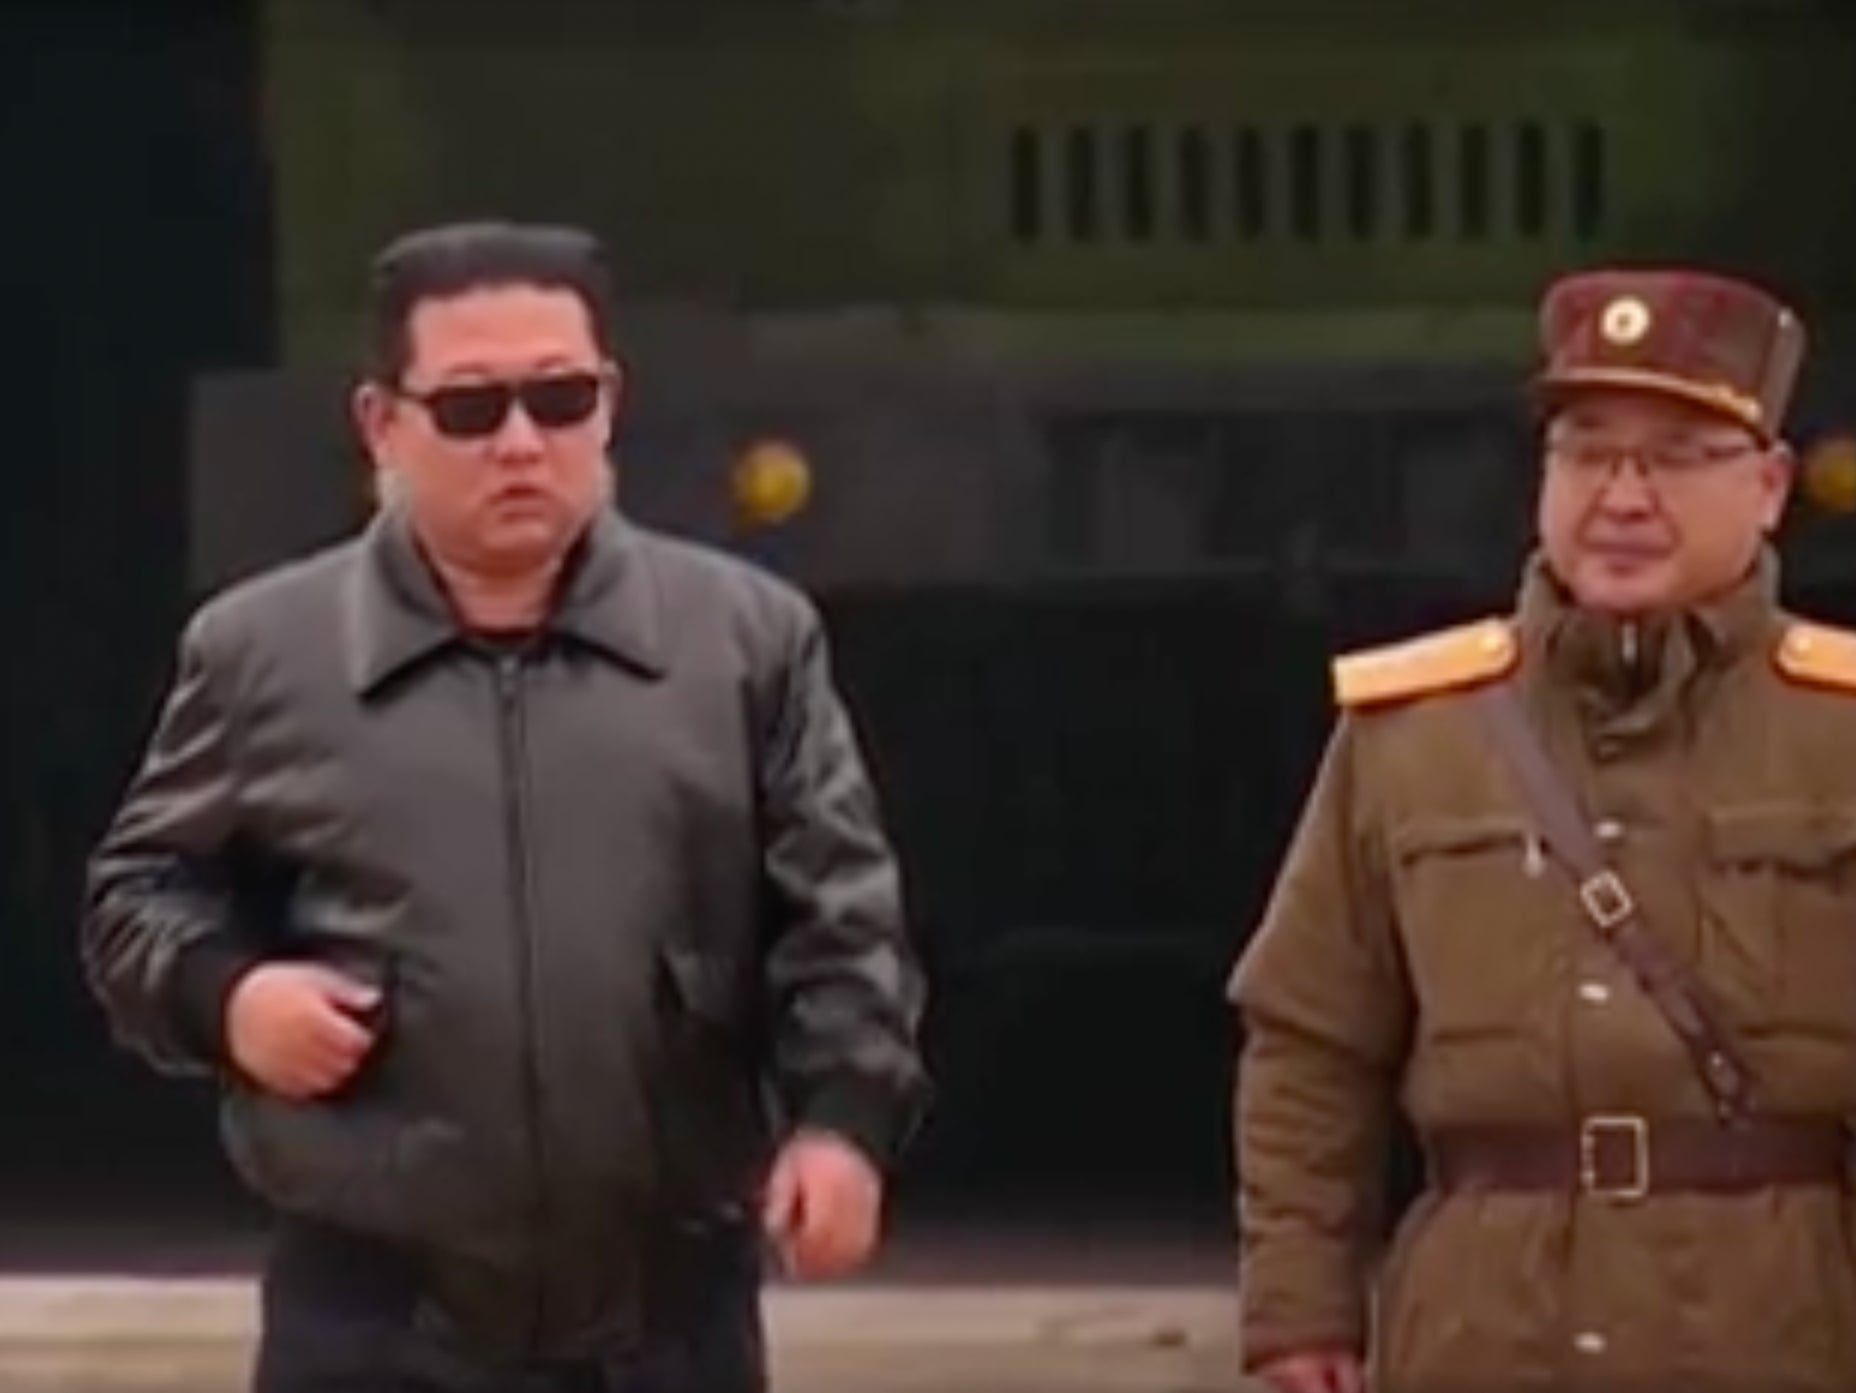 Mr Kim appeared in the video dressed in sunglasses and a leather jacket